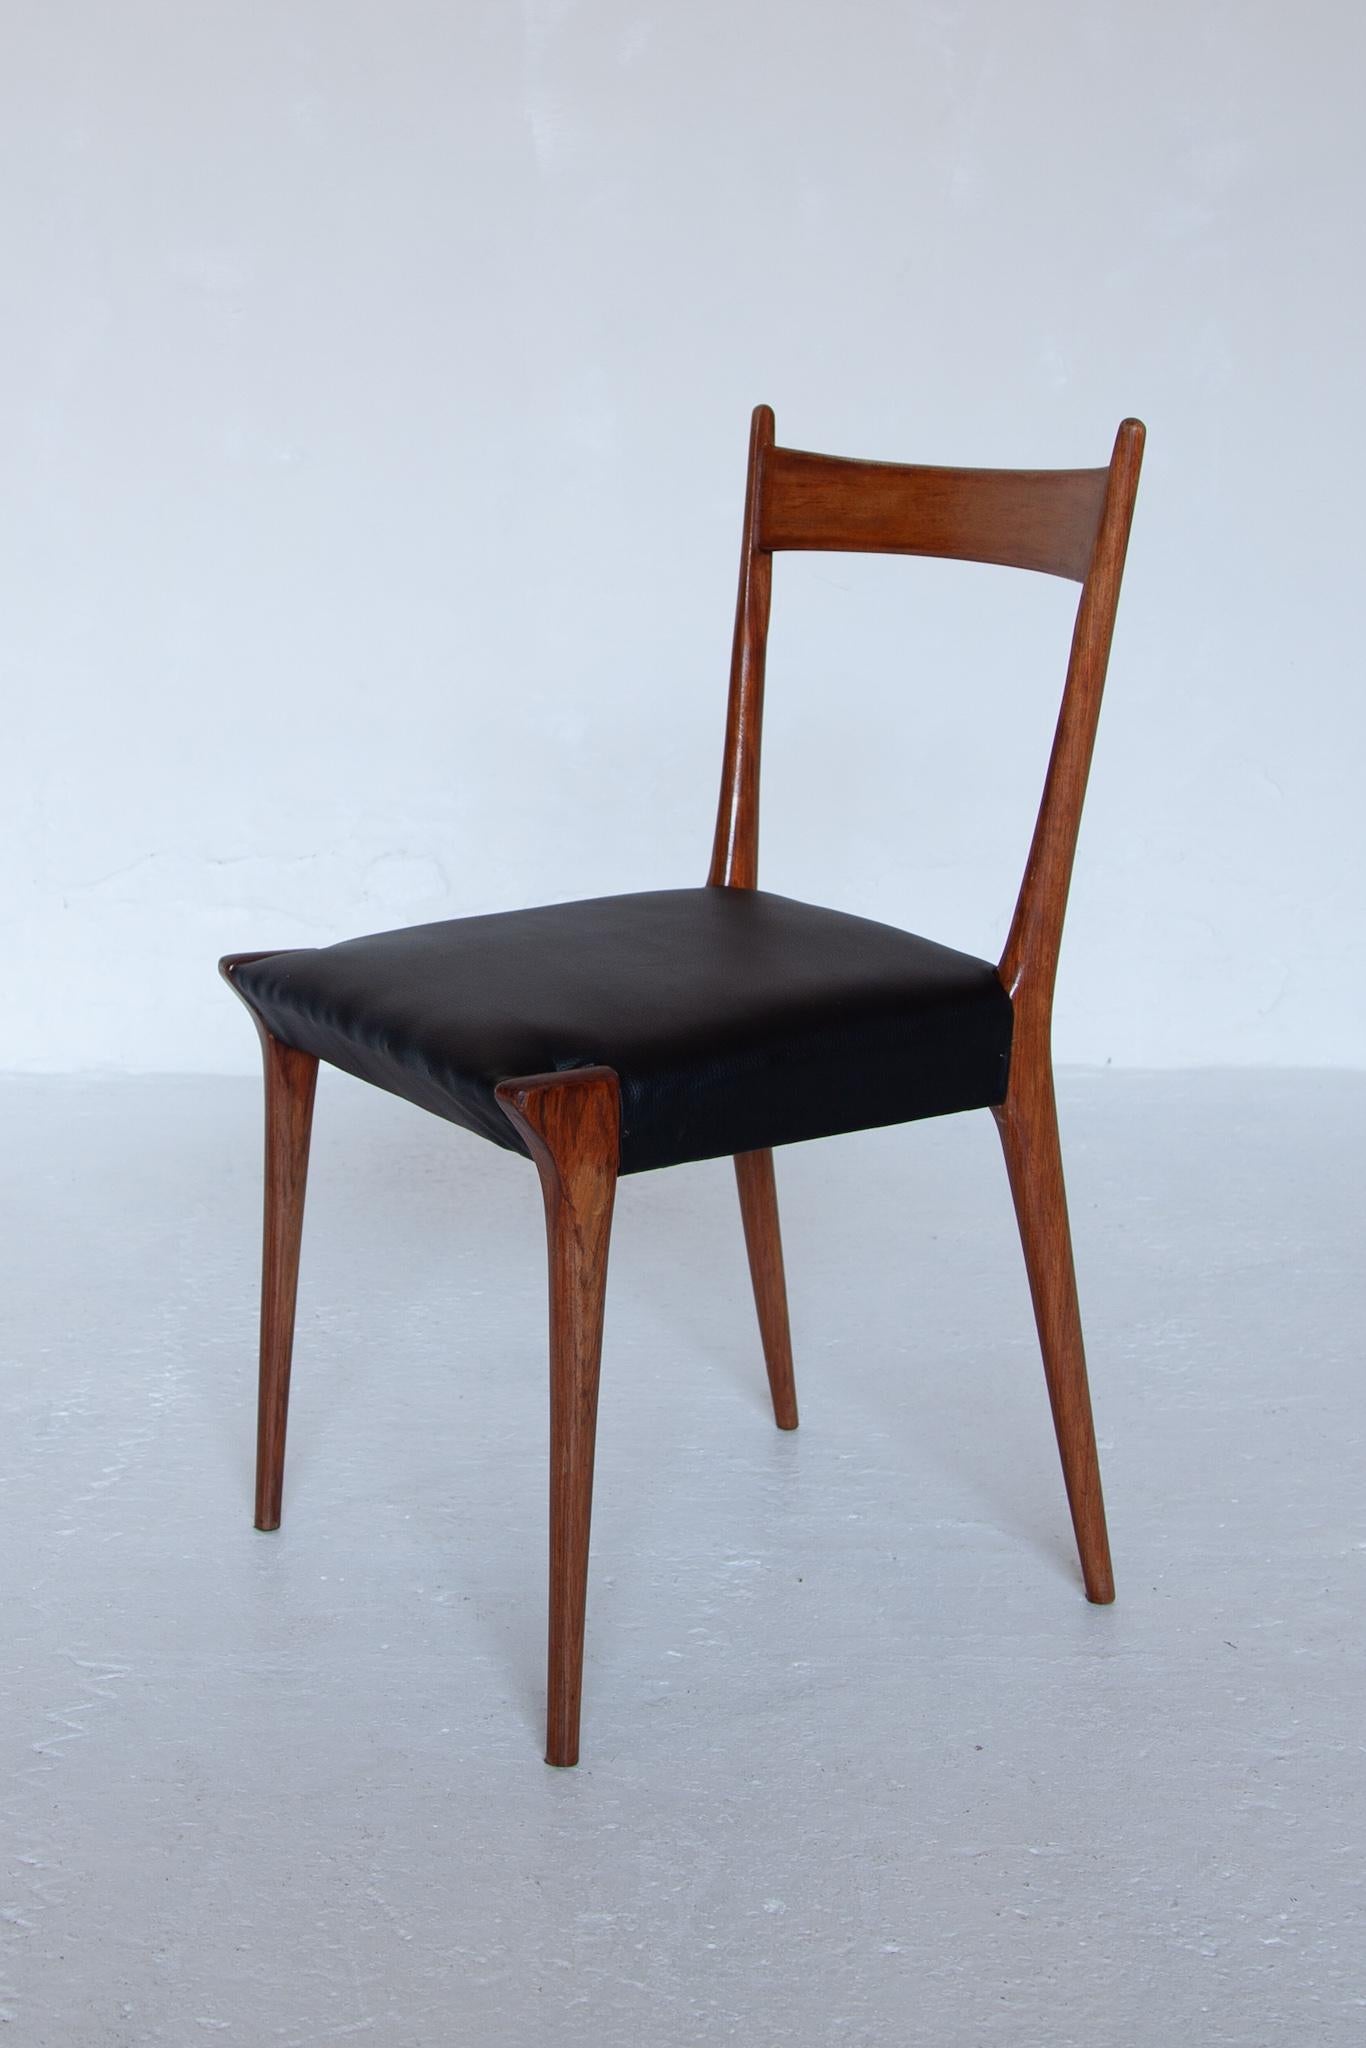 Hand-Crafted Set of Eight Dining Chairs 1958, Belgium for Belform by Alfred Hendrickx For Sale